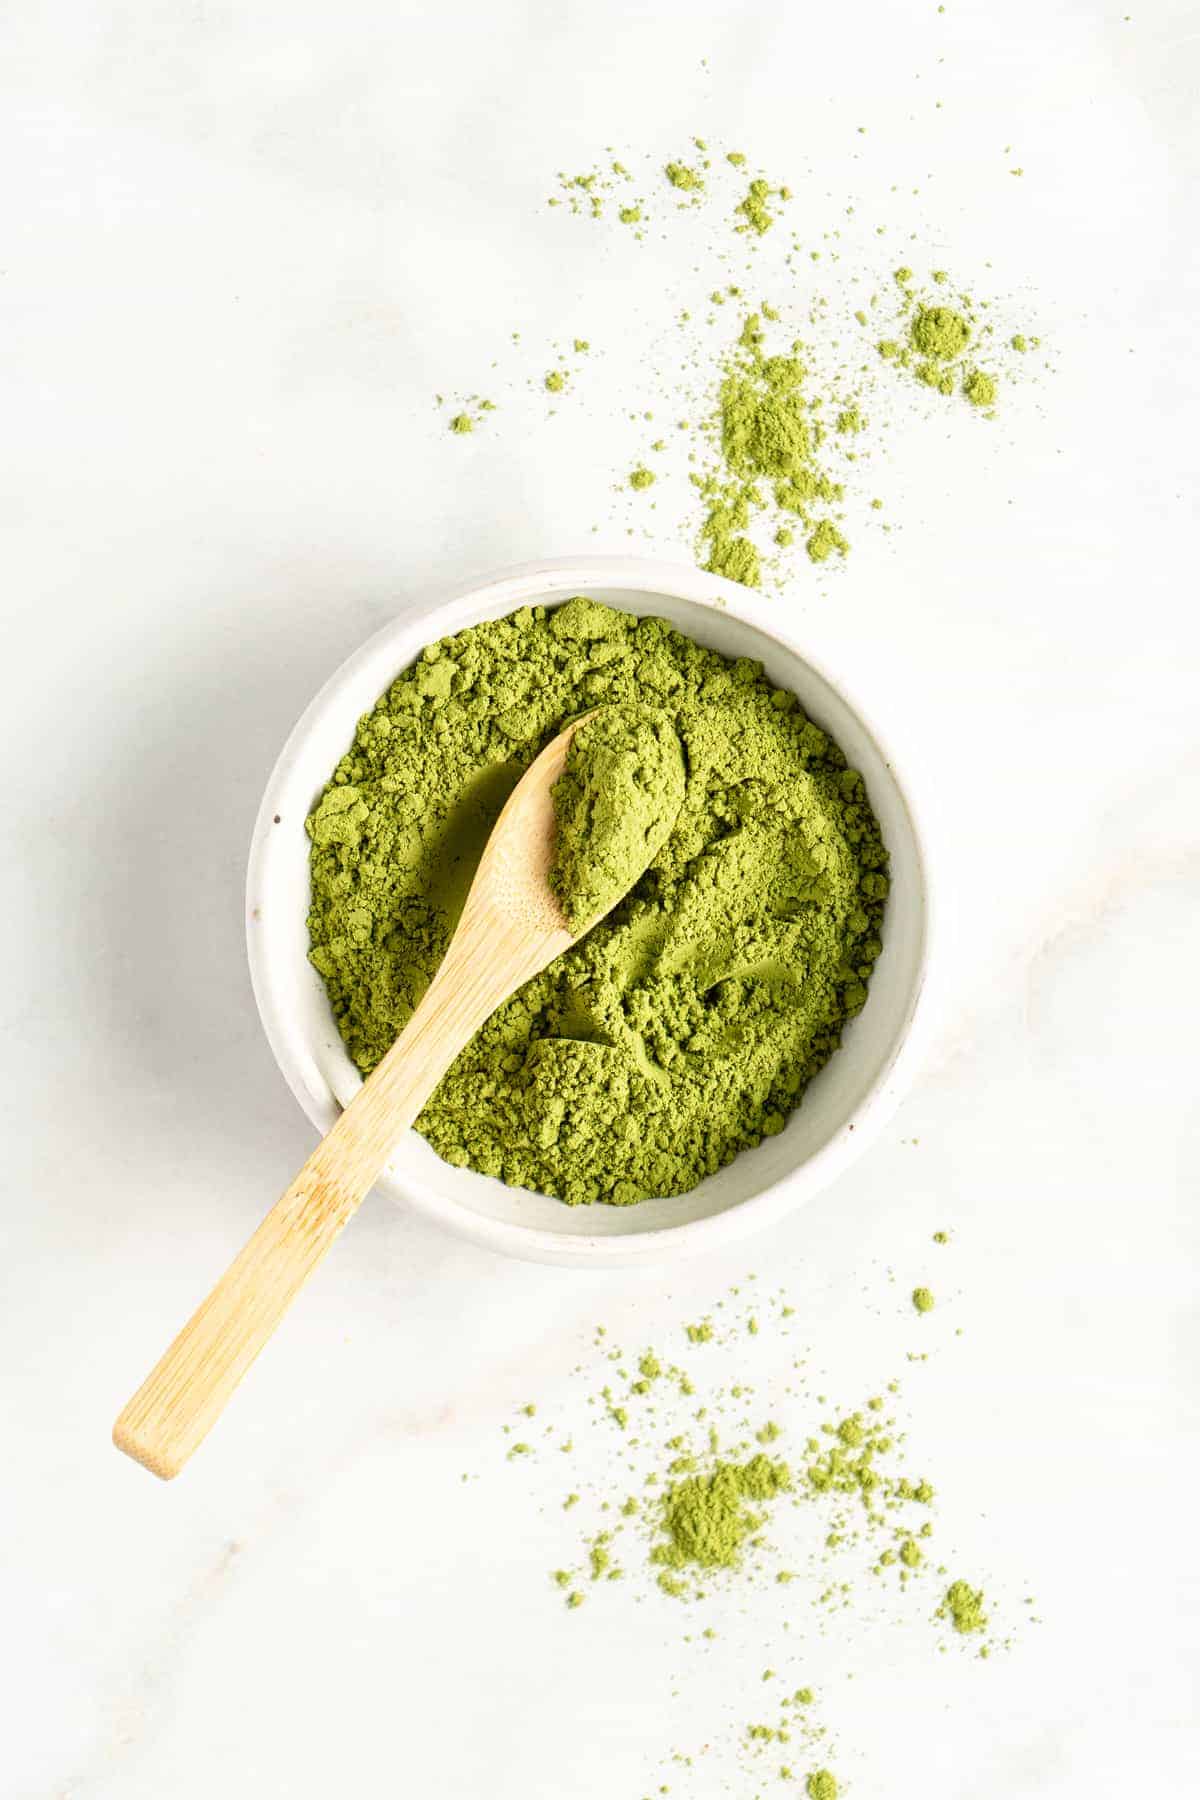 Matcha powder in white matcha bowl with wooden spoon